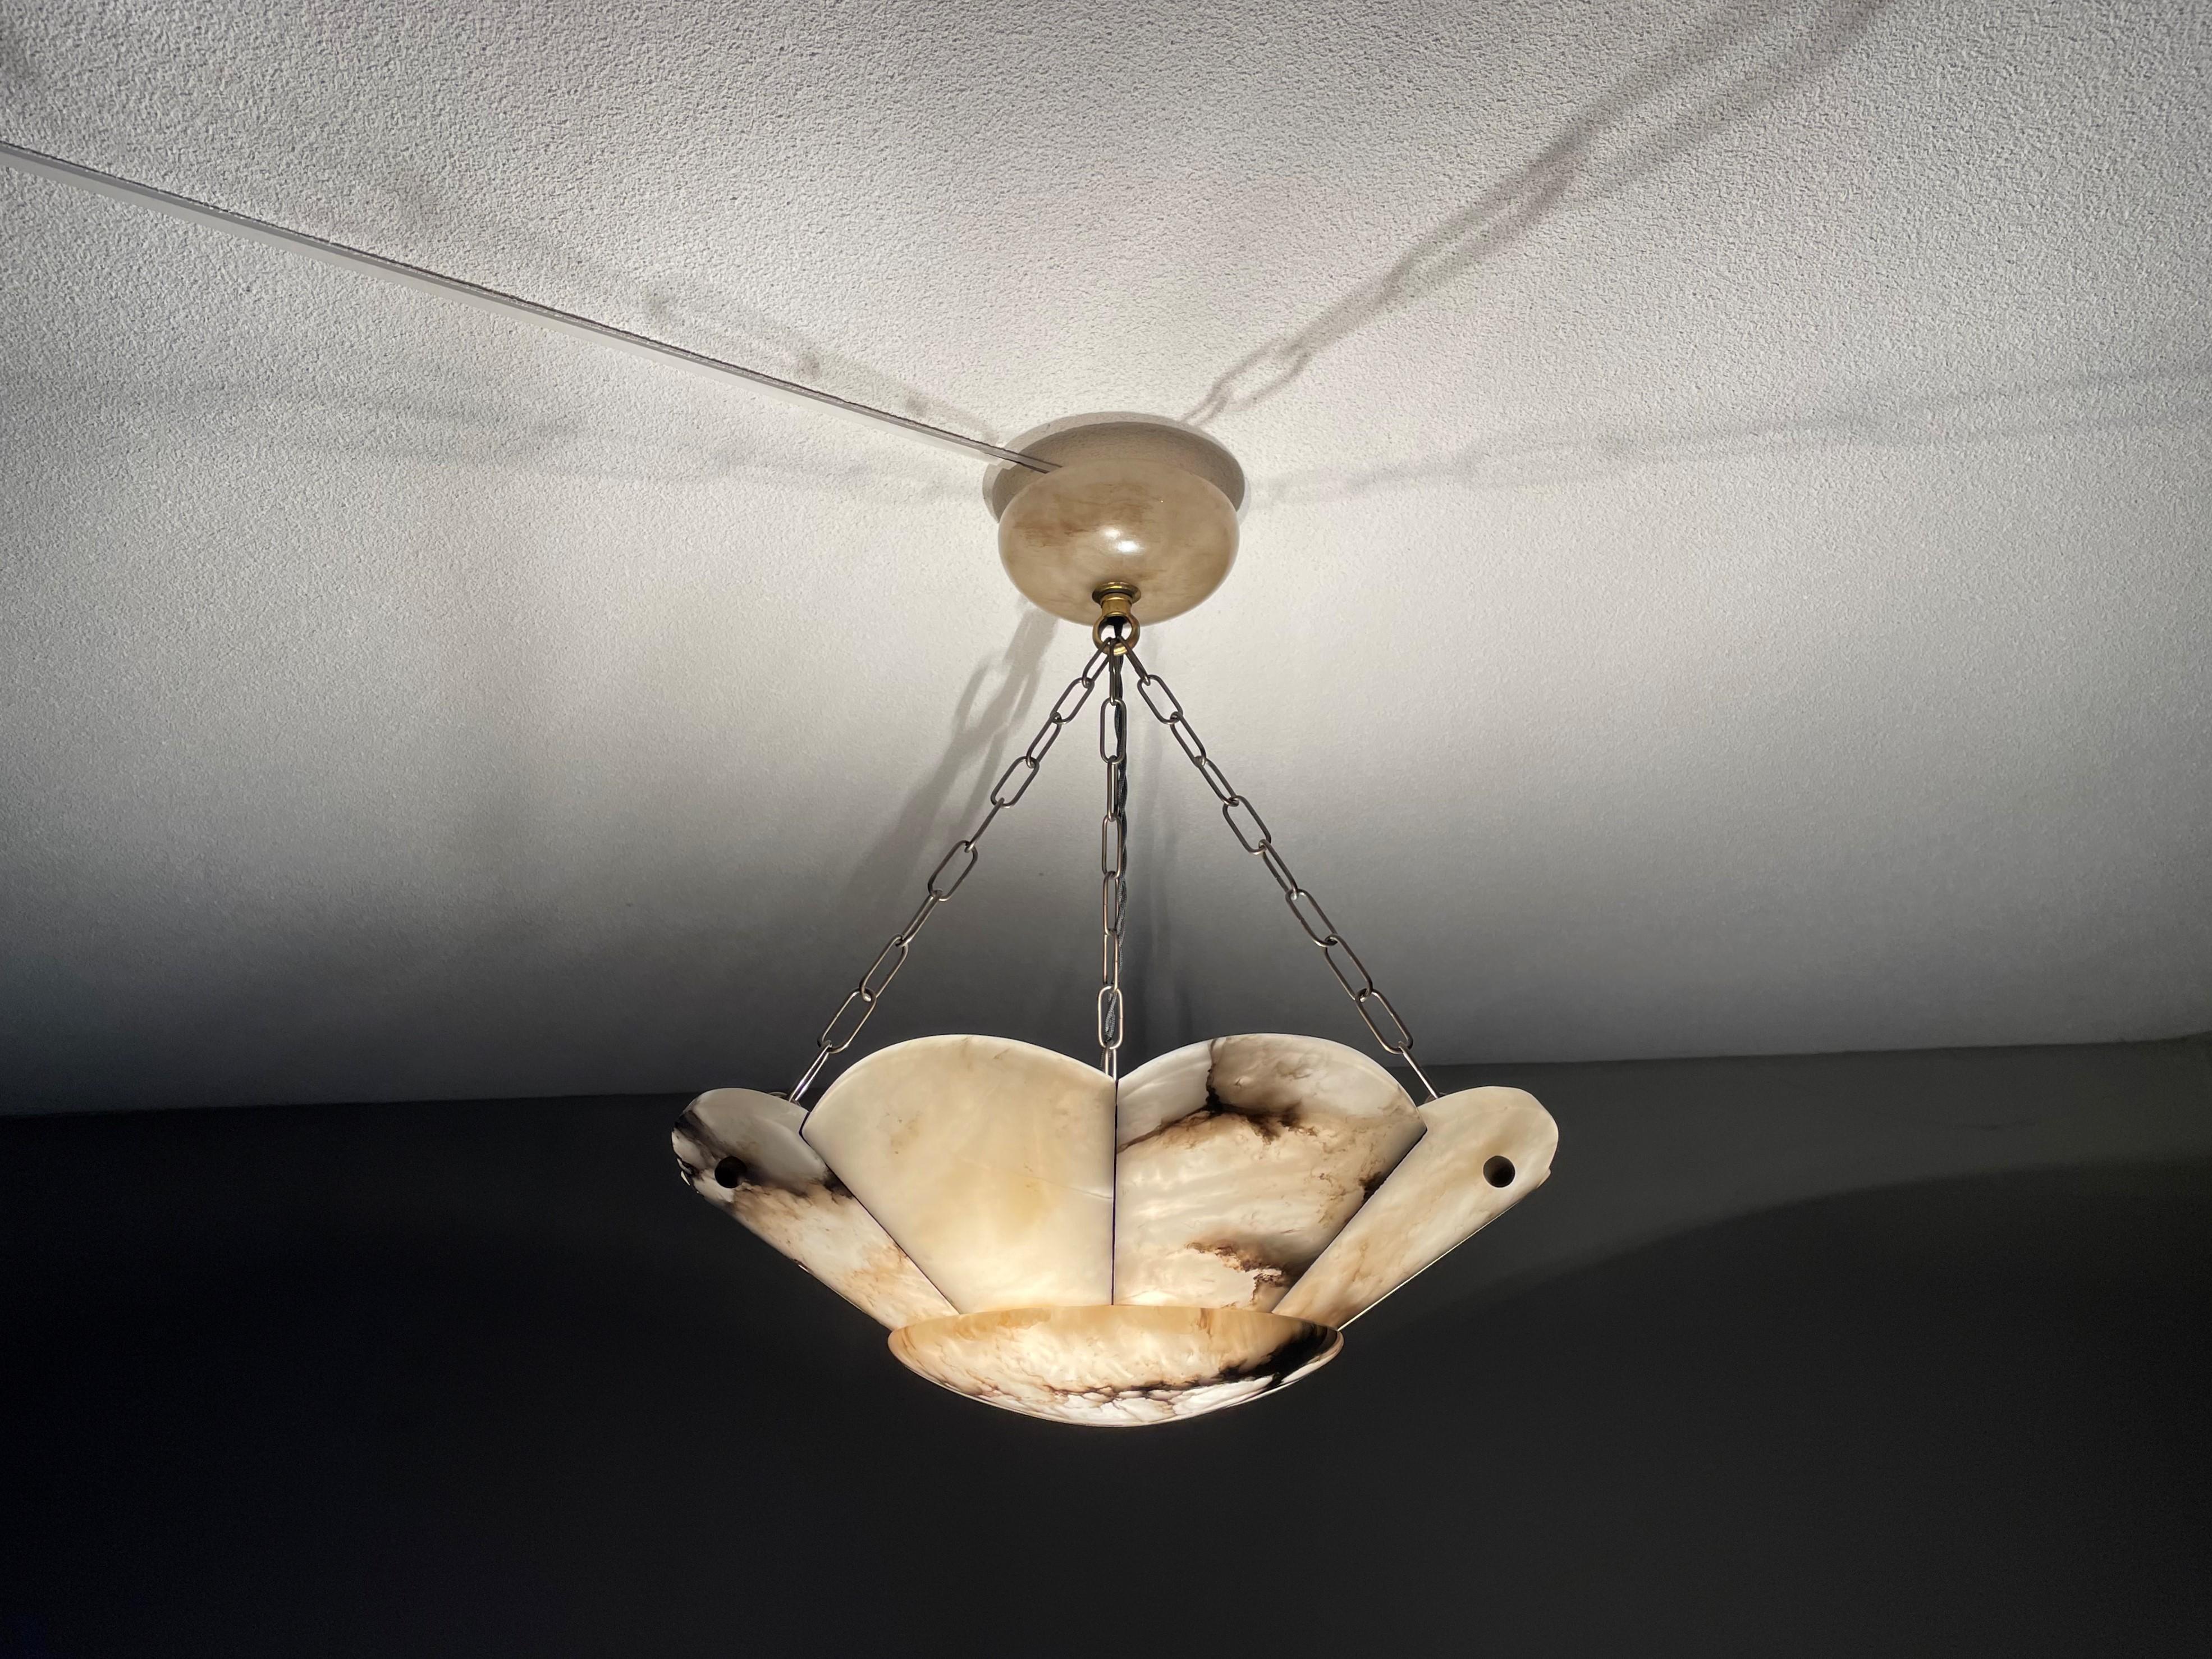 Top class, Arts & Crafts era chandelier with a unique alabaster shade and perfect canopy.

Thanks to its large size and truly excellent condition this alabaster chandelier will light up both your days and evenings. It is all hand-crafted in the